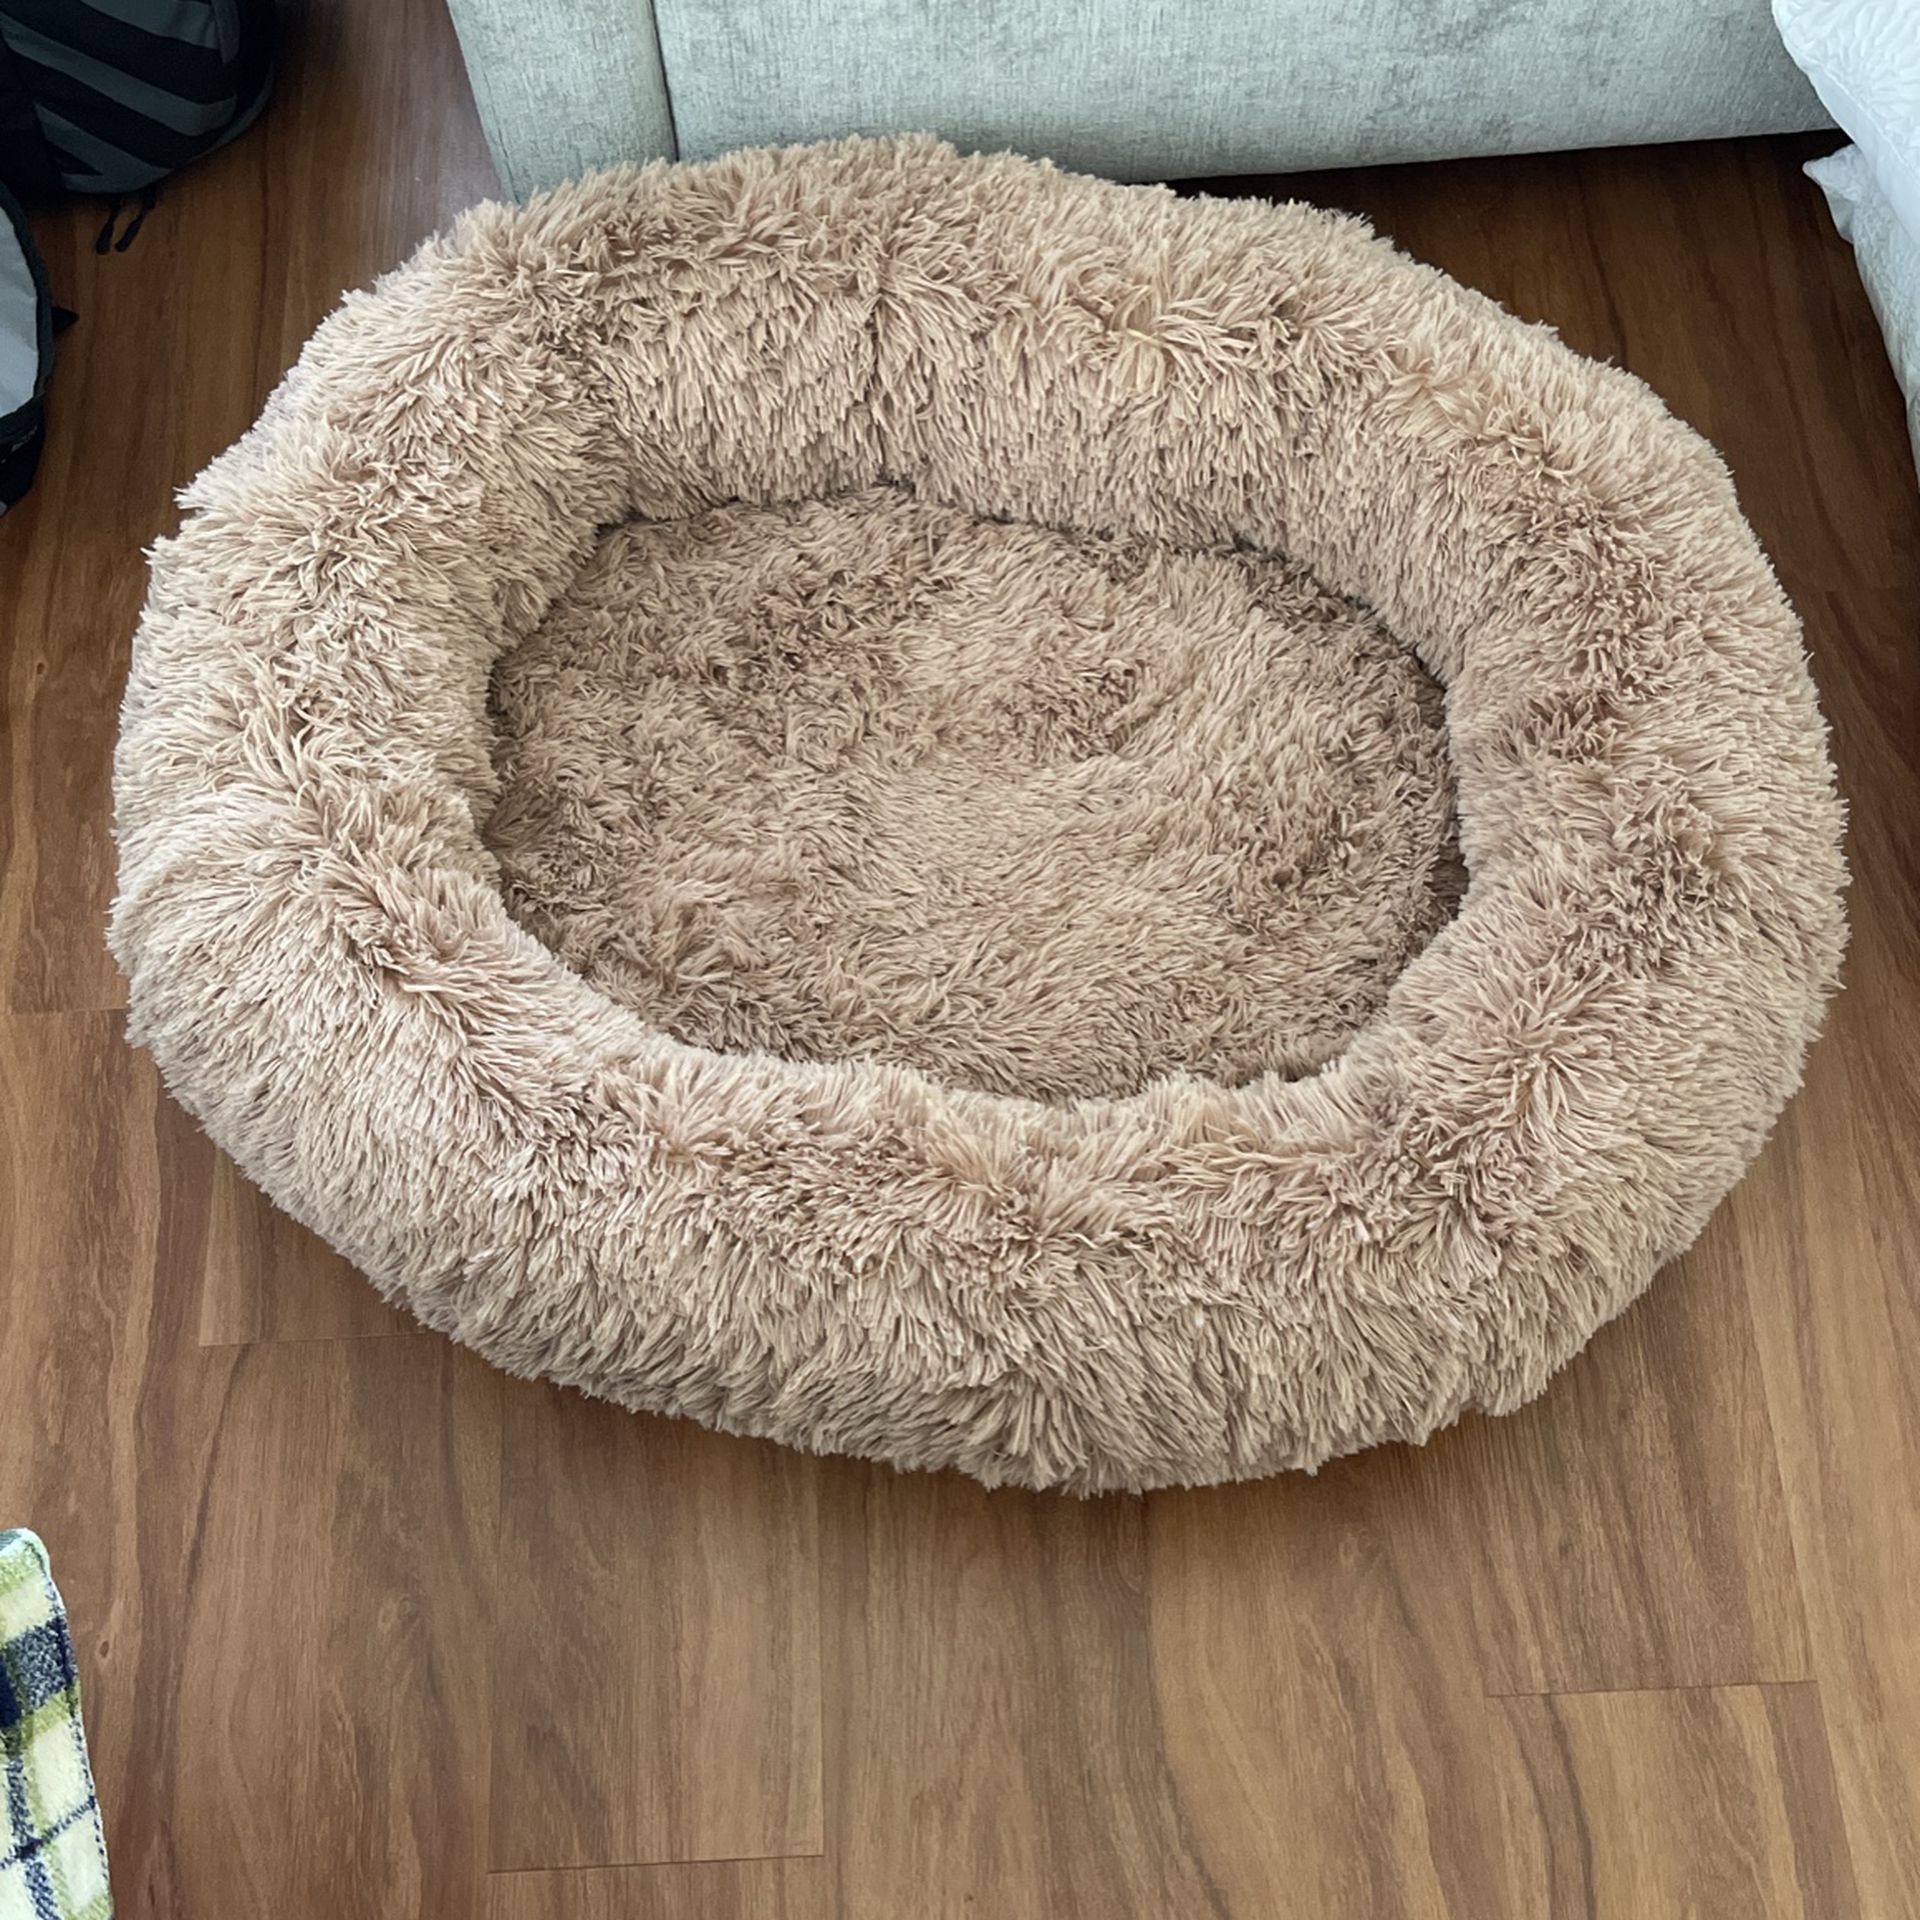 Large Fluffy Dog Bed BRAND NEW 